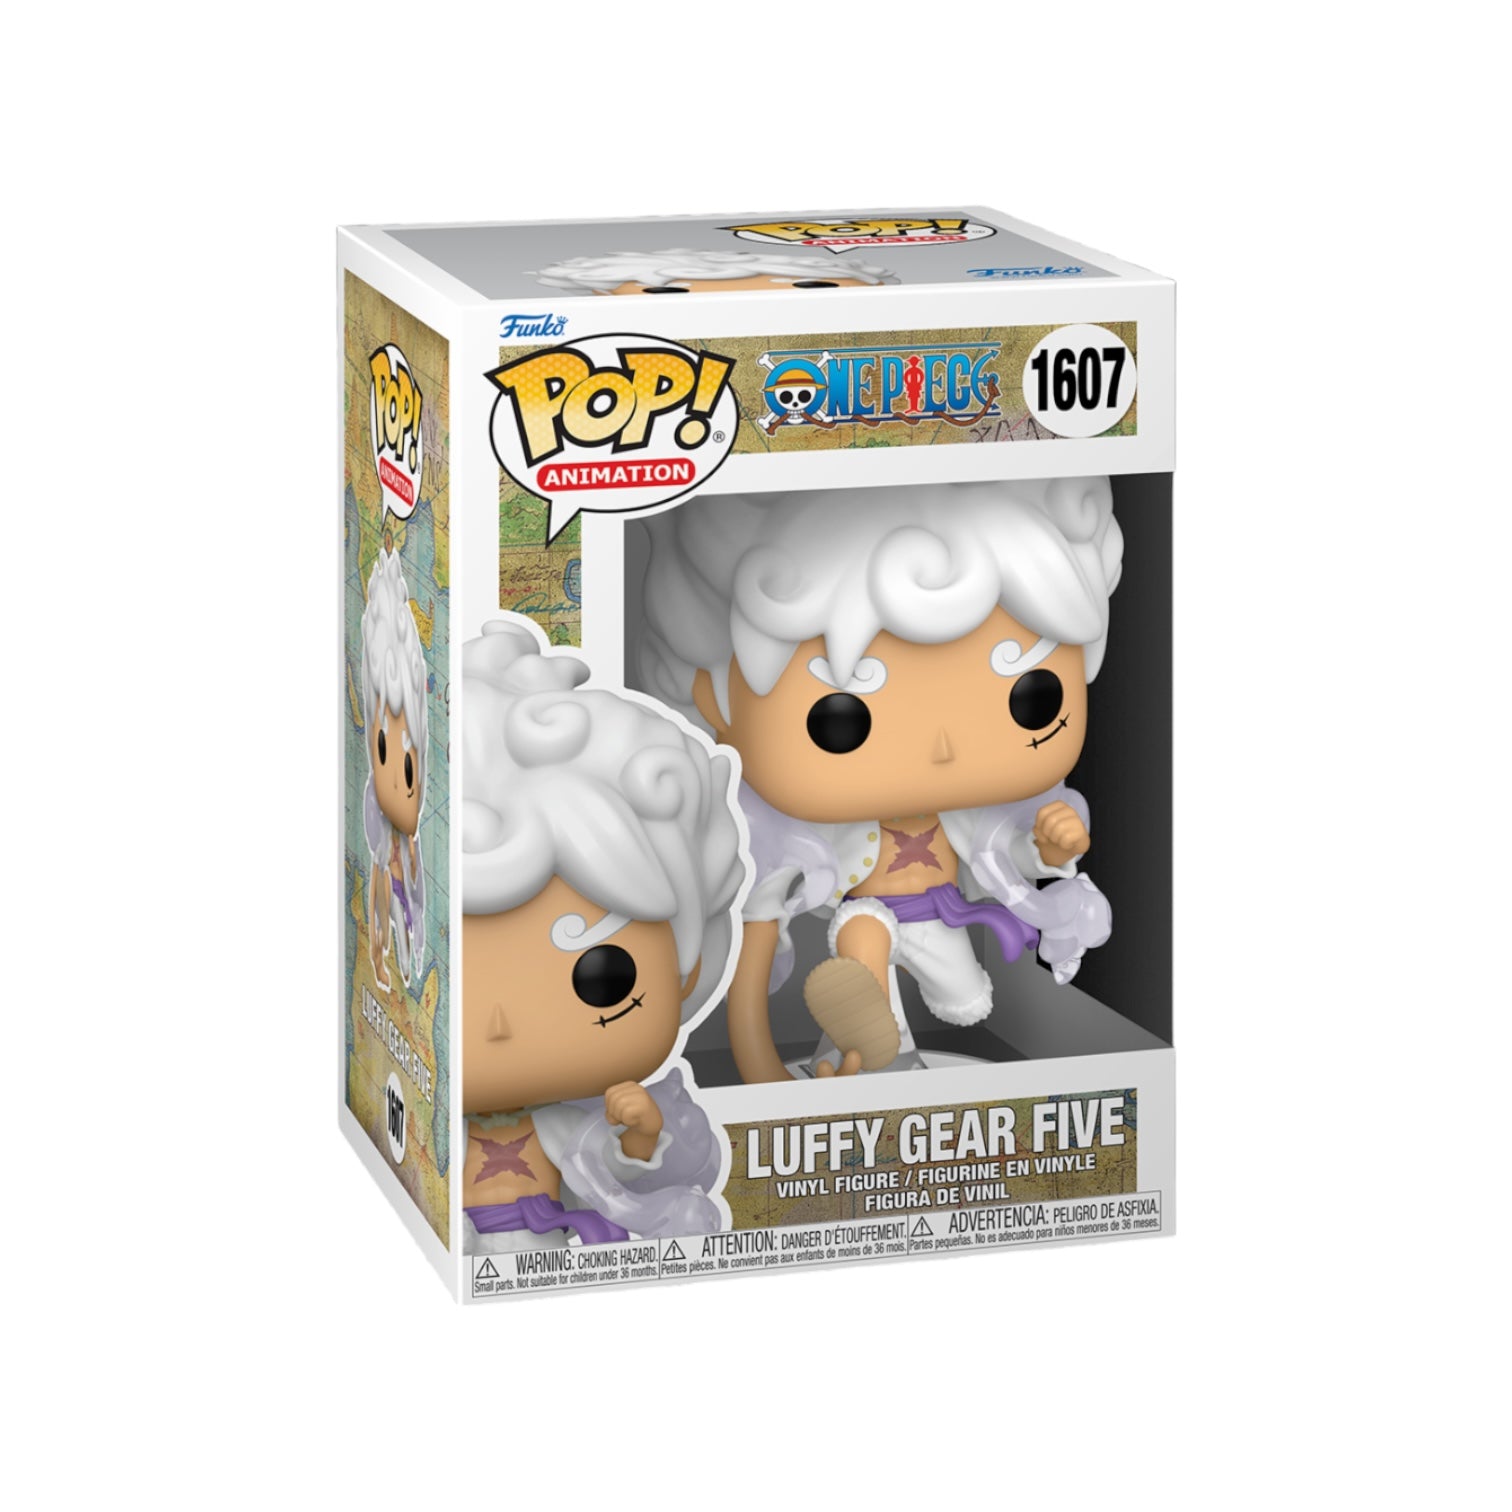 Luffy Gear Five #1607 (Chance of Glow Chase) Funko Pop! One Piece - PREORDER